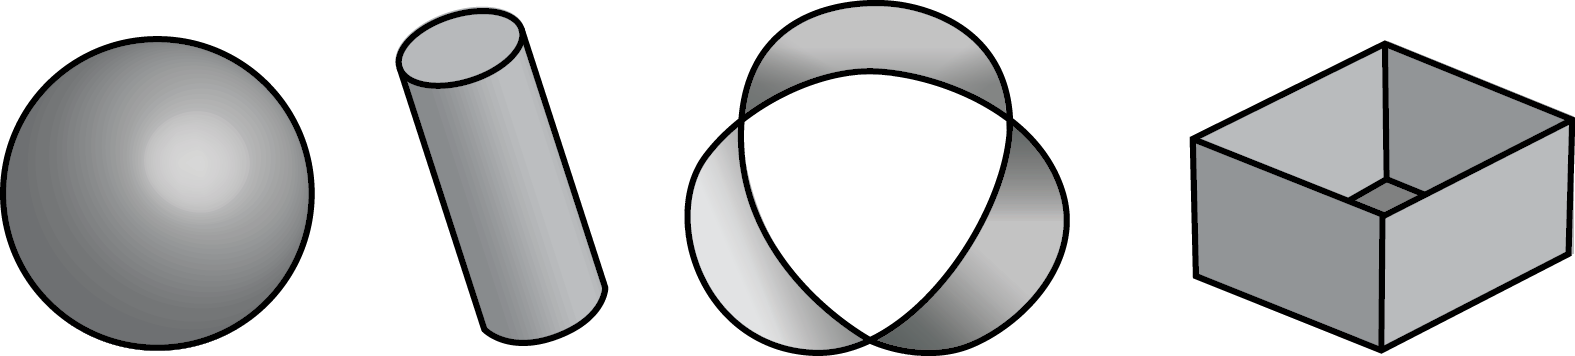 a sphere, a cylinder, a strip with 3 twists joined end-to-end, and an open-top box.